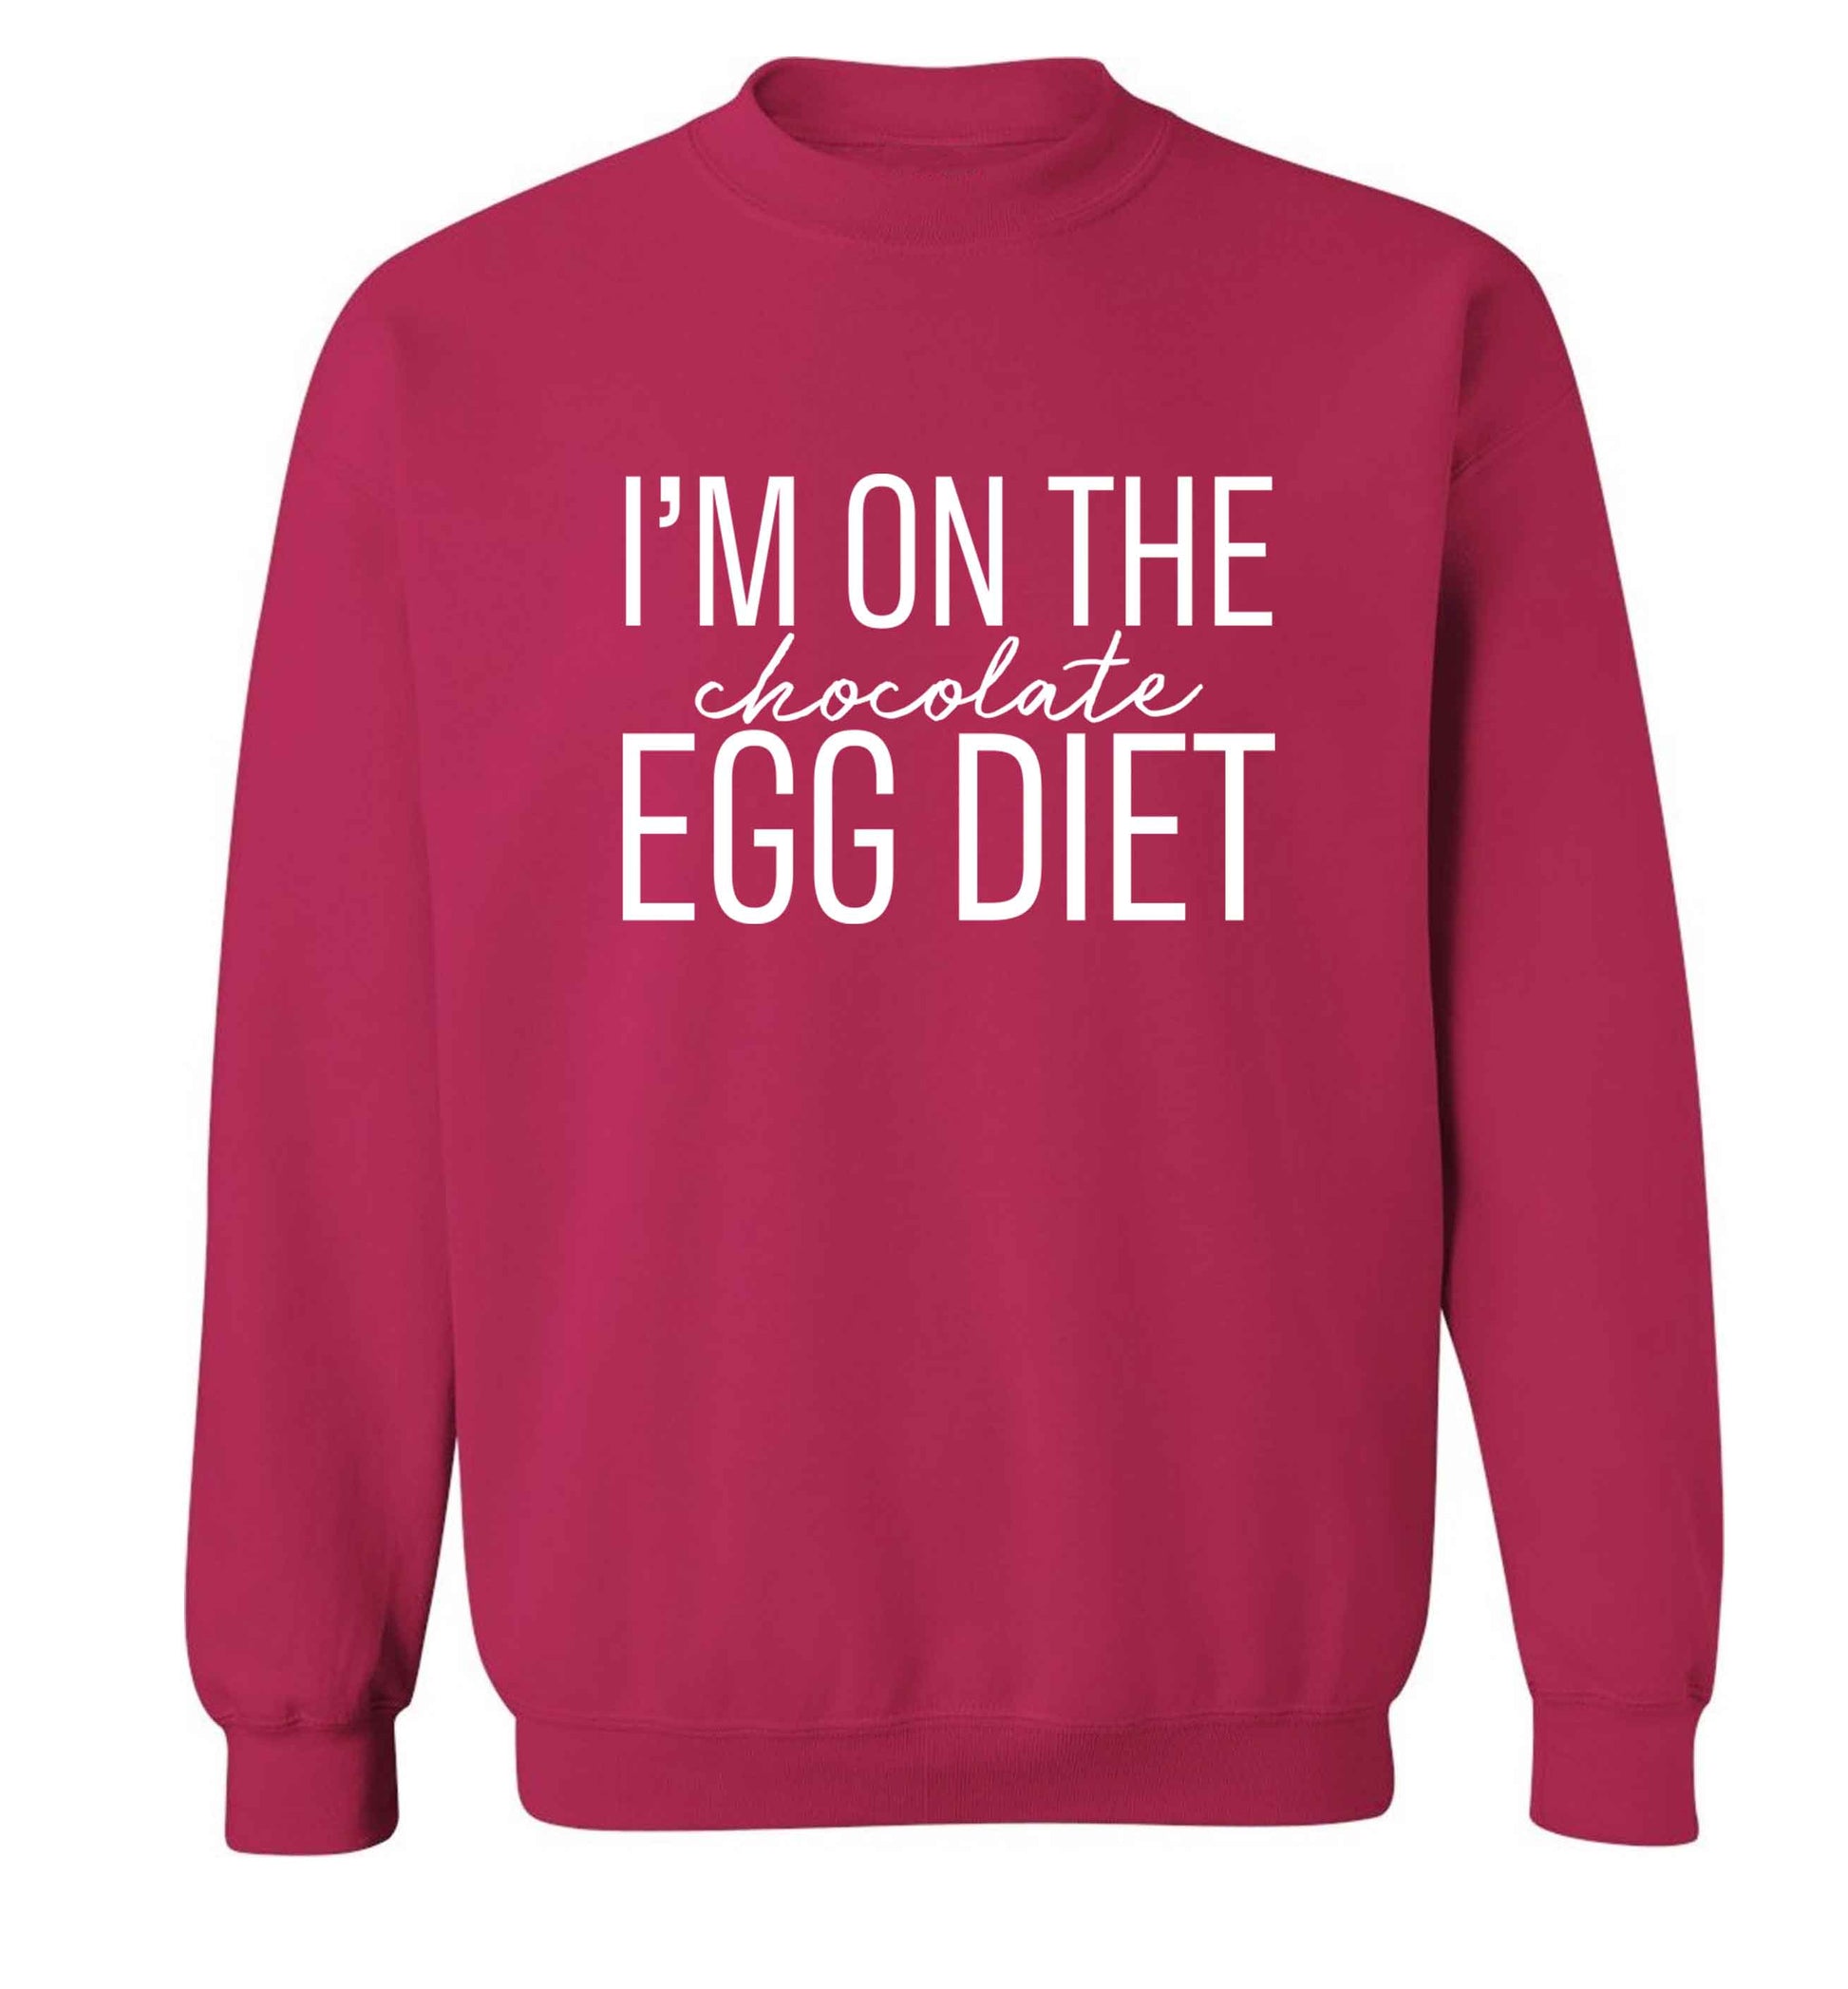 I'm on the chocolate egg diet adult's unisex pink sweater 2XL